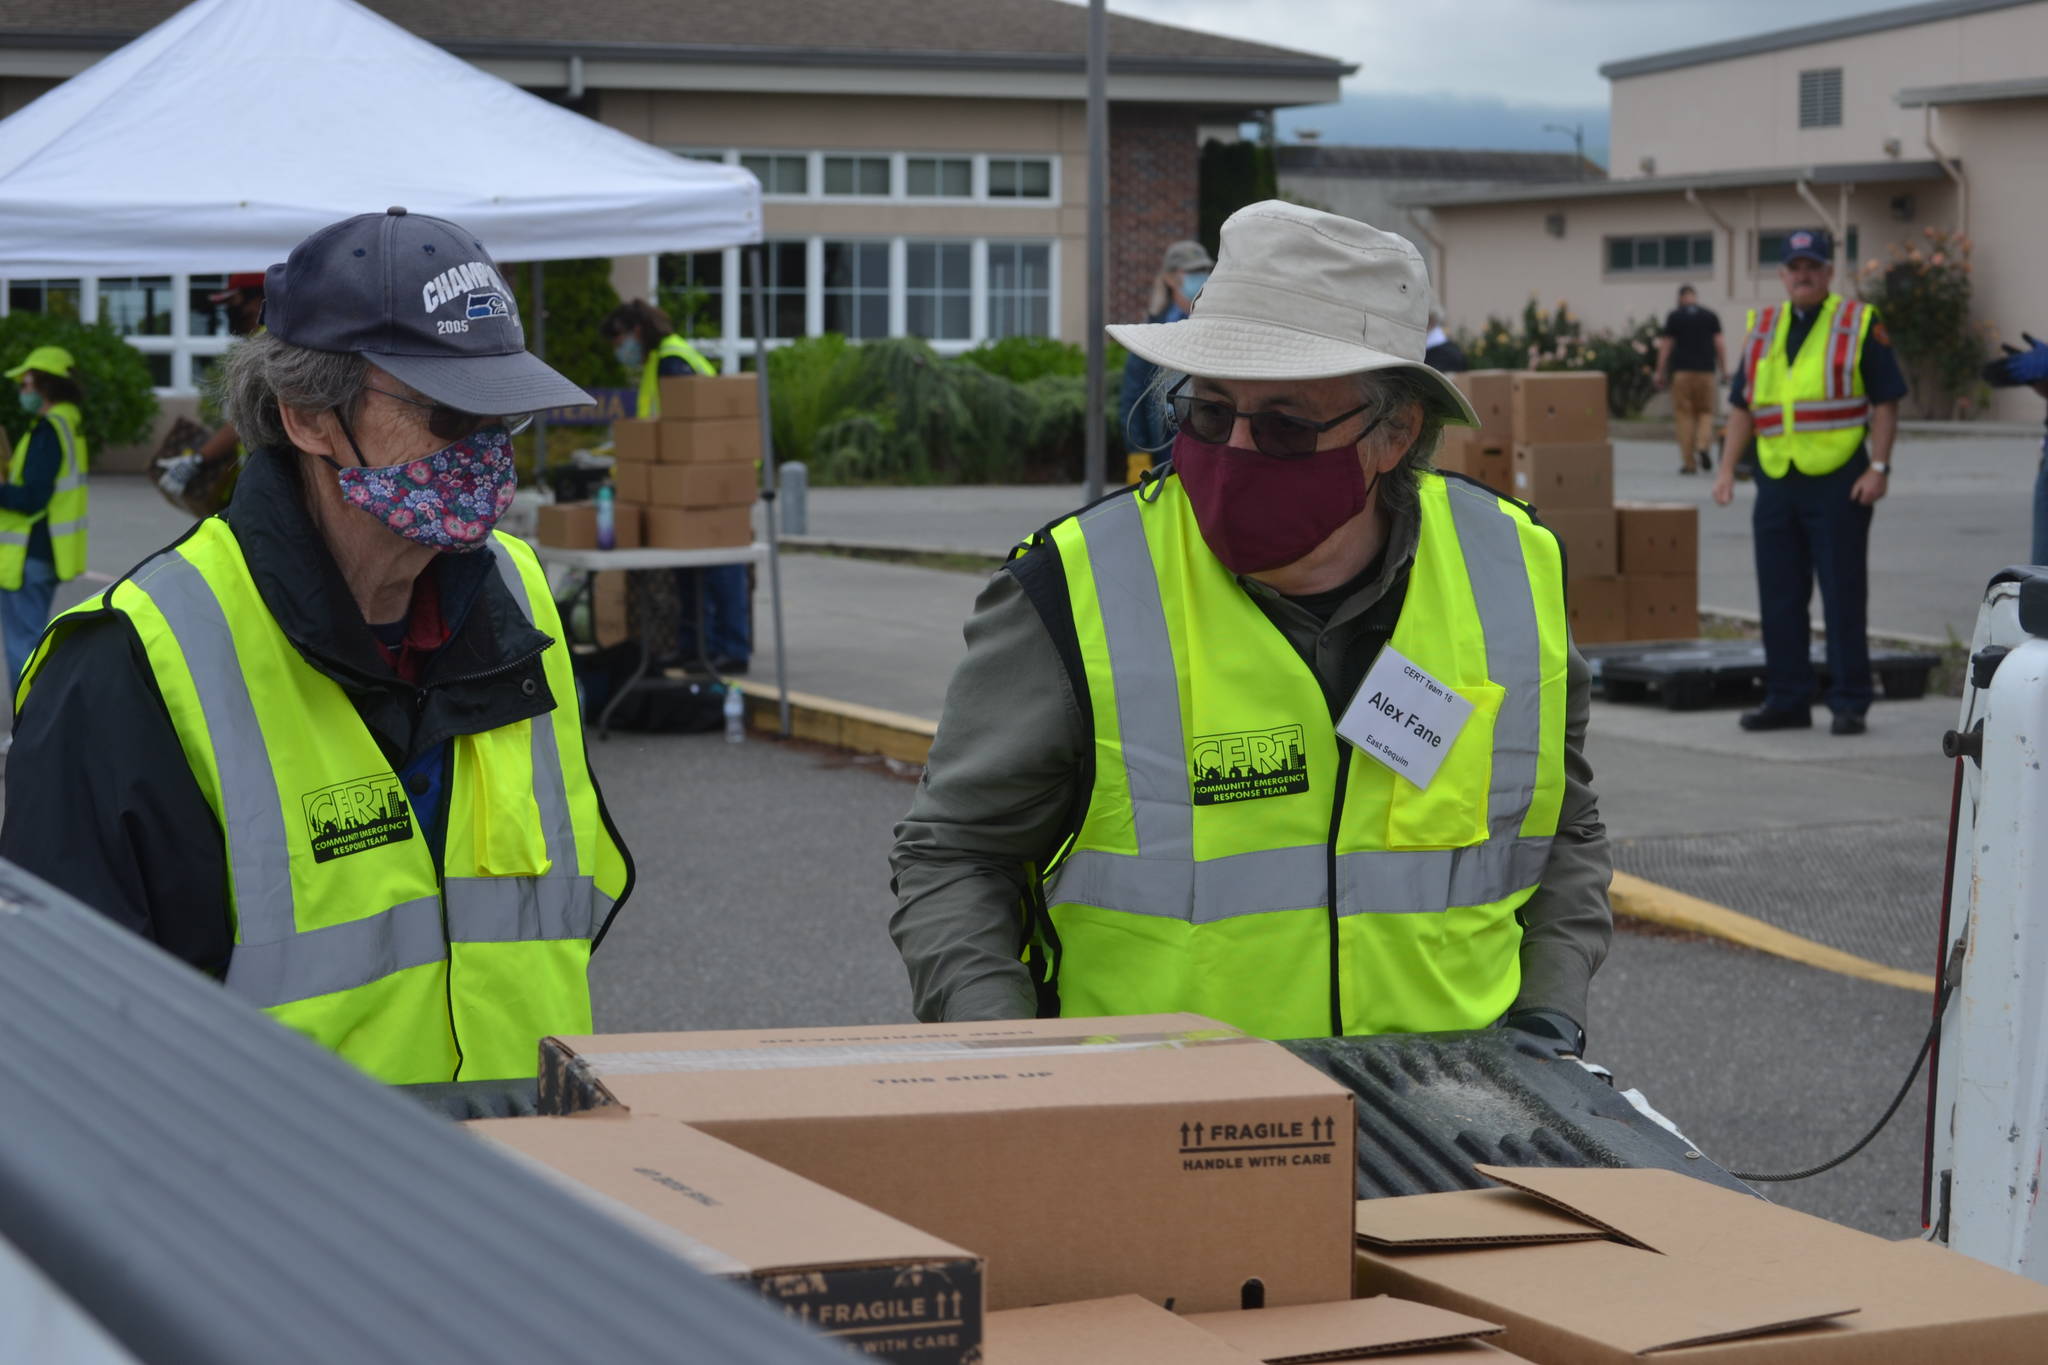 Volunteers Bruce Leigh and Alex Fane with Community Emergency Response Teams (CERT) put food boxes in a truck bed on June 10 at Sequim High School. The program moves to Trinity United Methodist Church from 11 a.m.-2 p.m. Wednesdays starting Aug. 26. Sequim Gazette photo by Matthew Nash